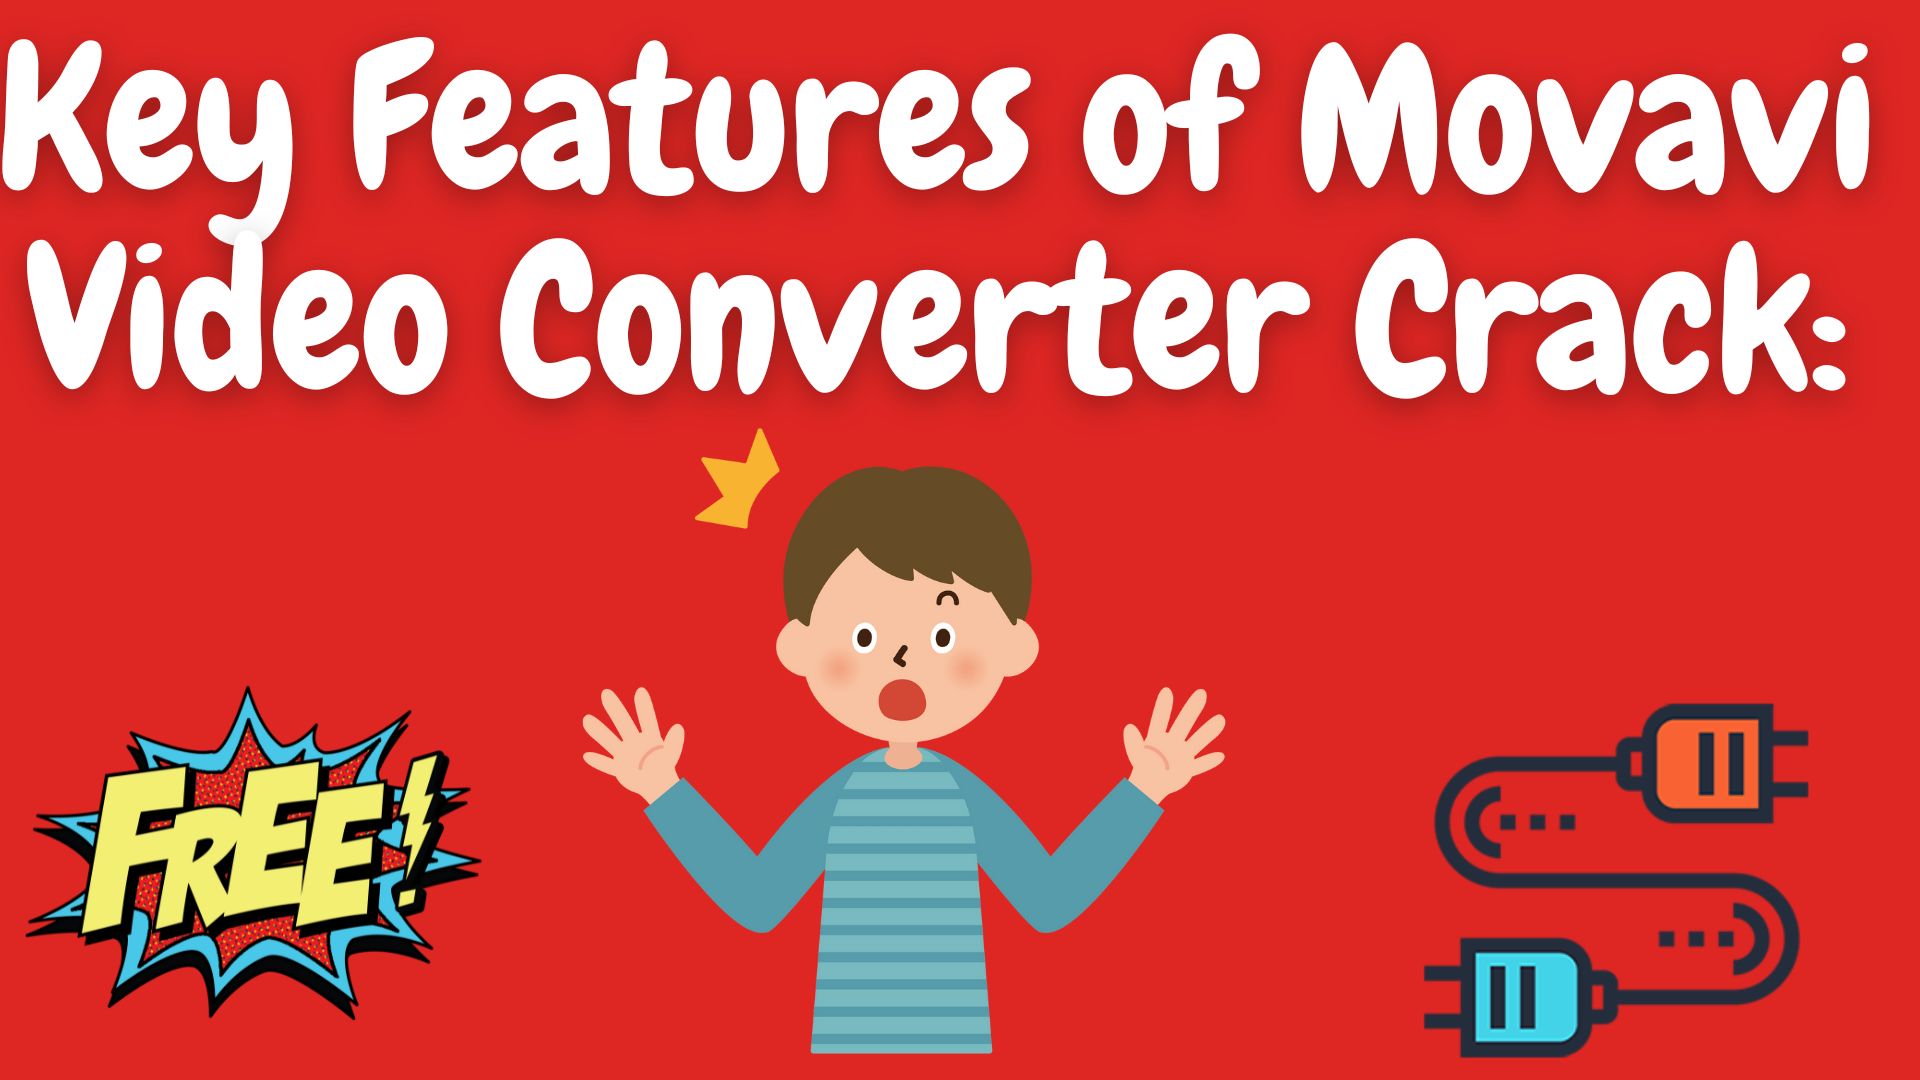 Key Features of Movavi Video Converter Crack: